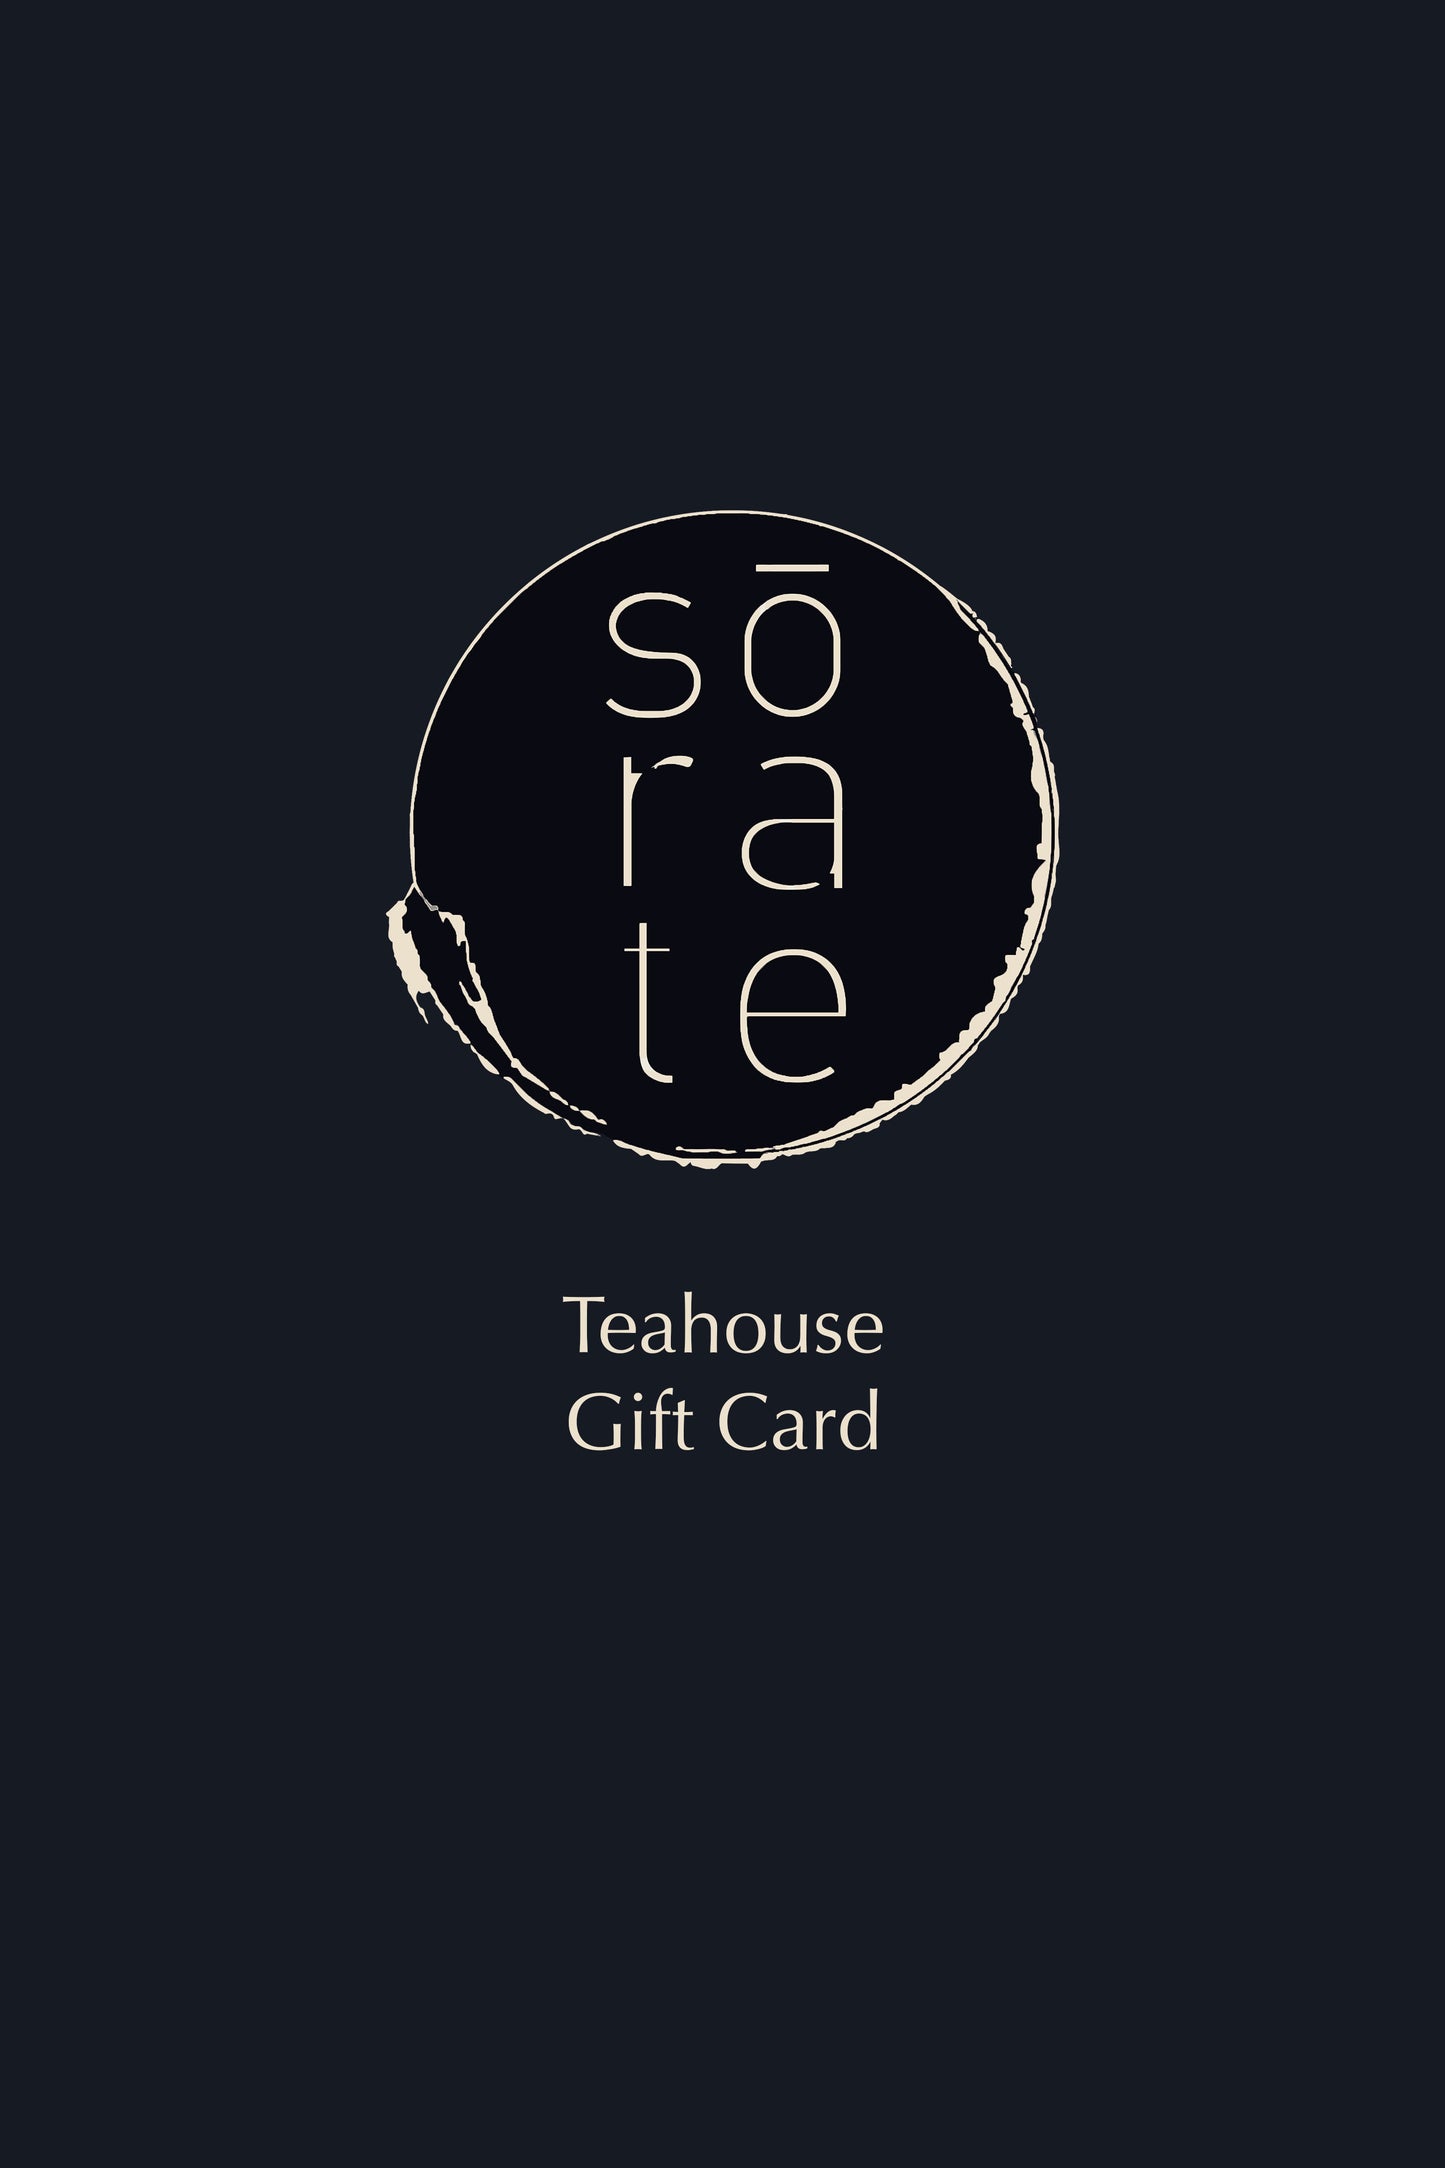 Sorate Teahouse Gift Card